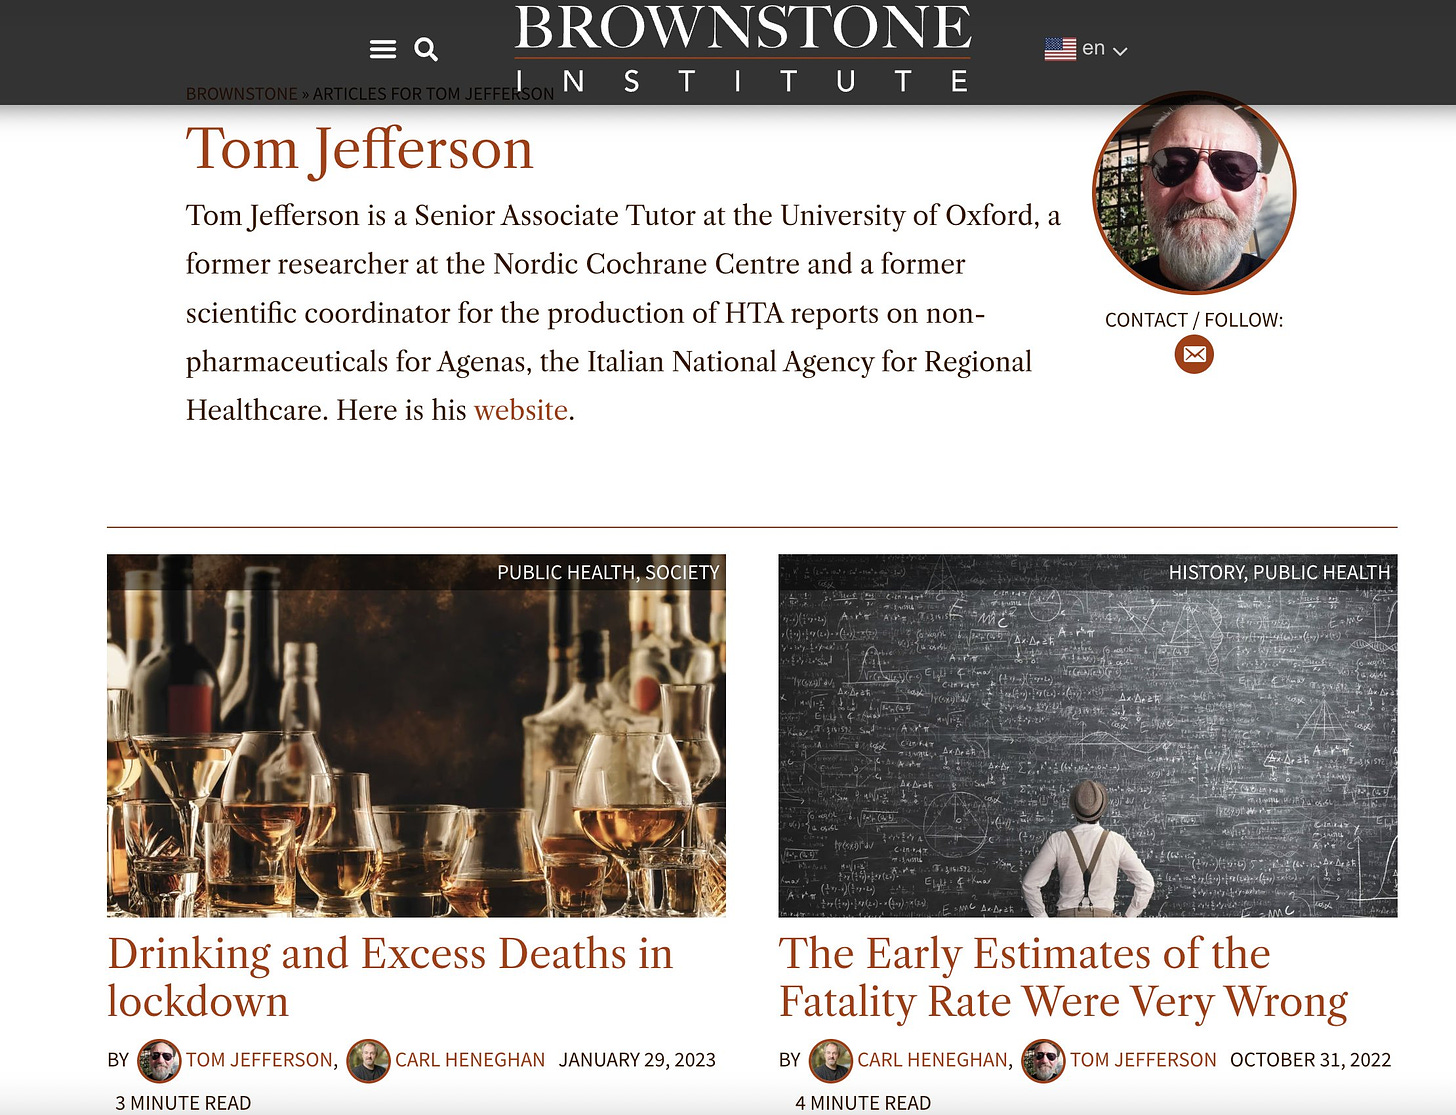 Image Tom Jefferson's author page for the rightoid propaganda outlet Brownstone Institute